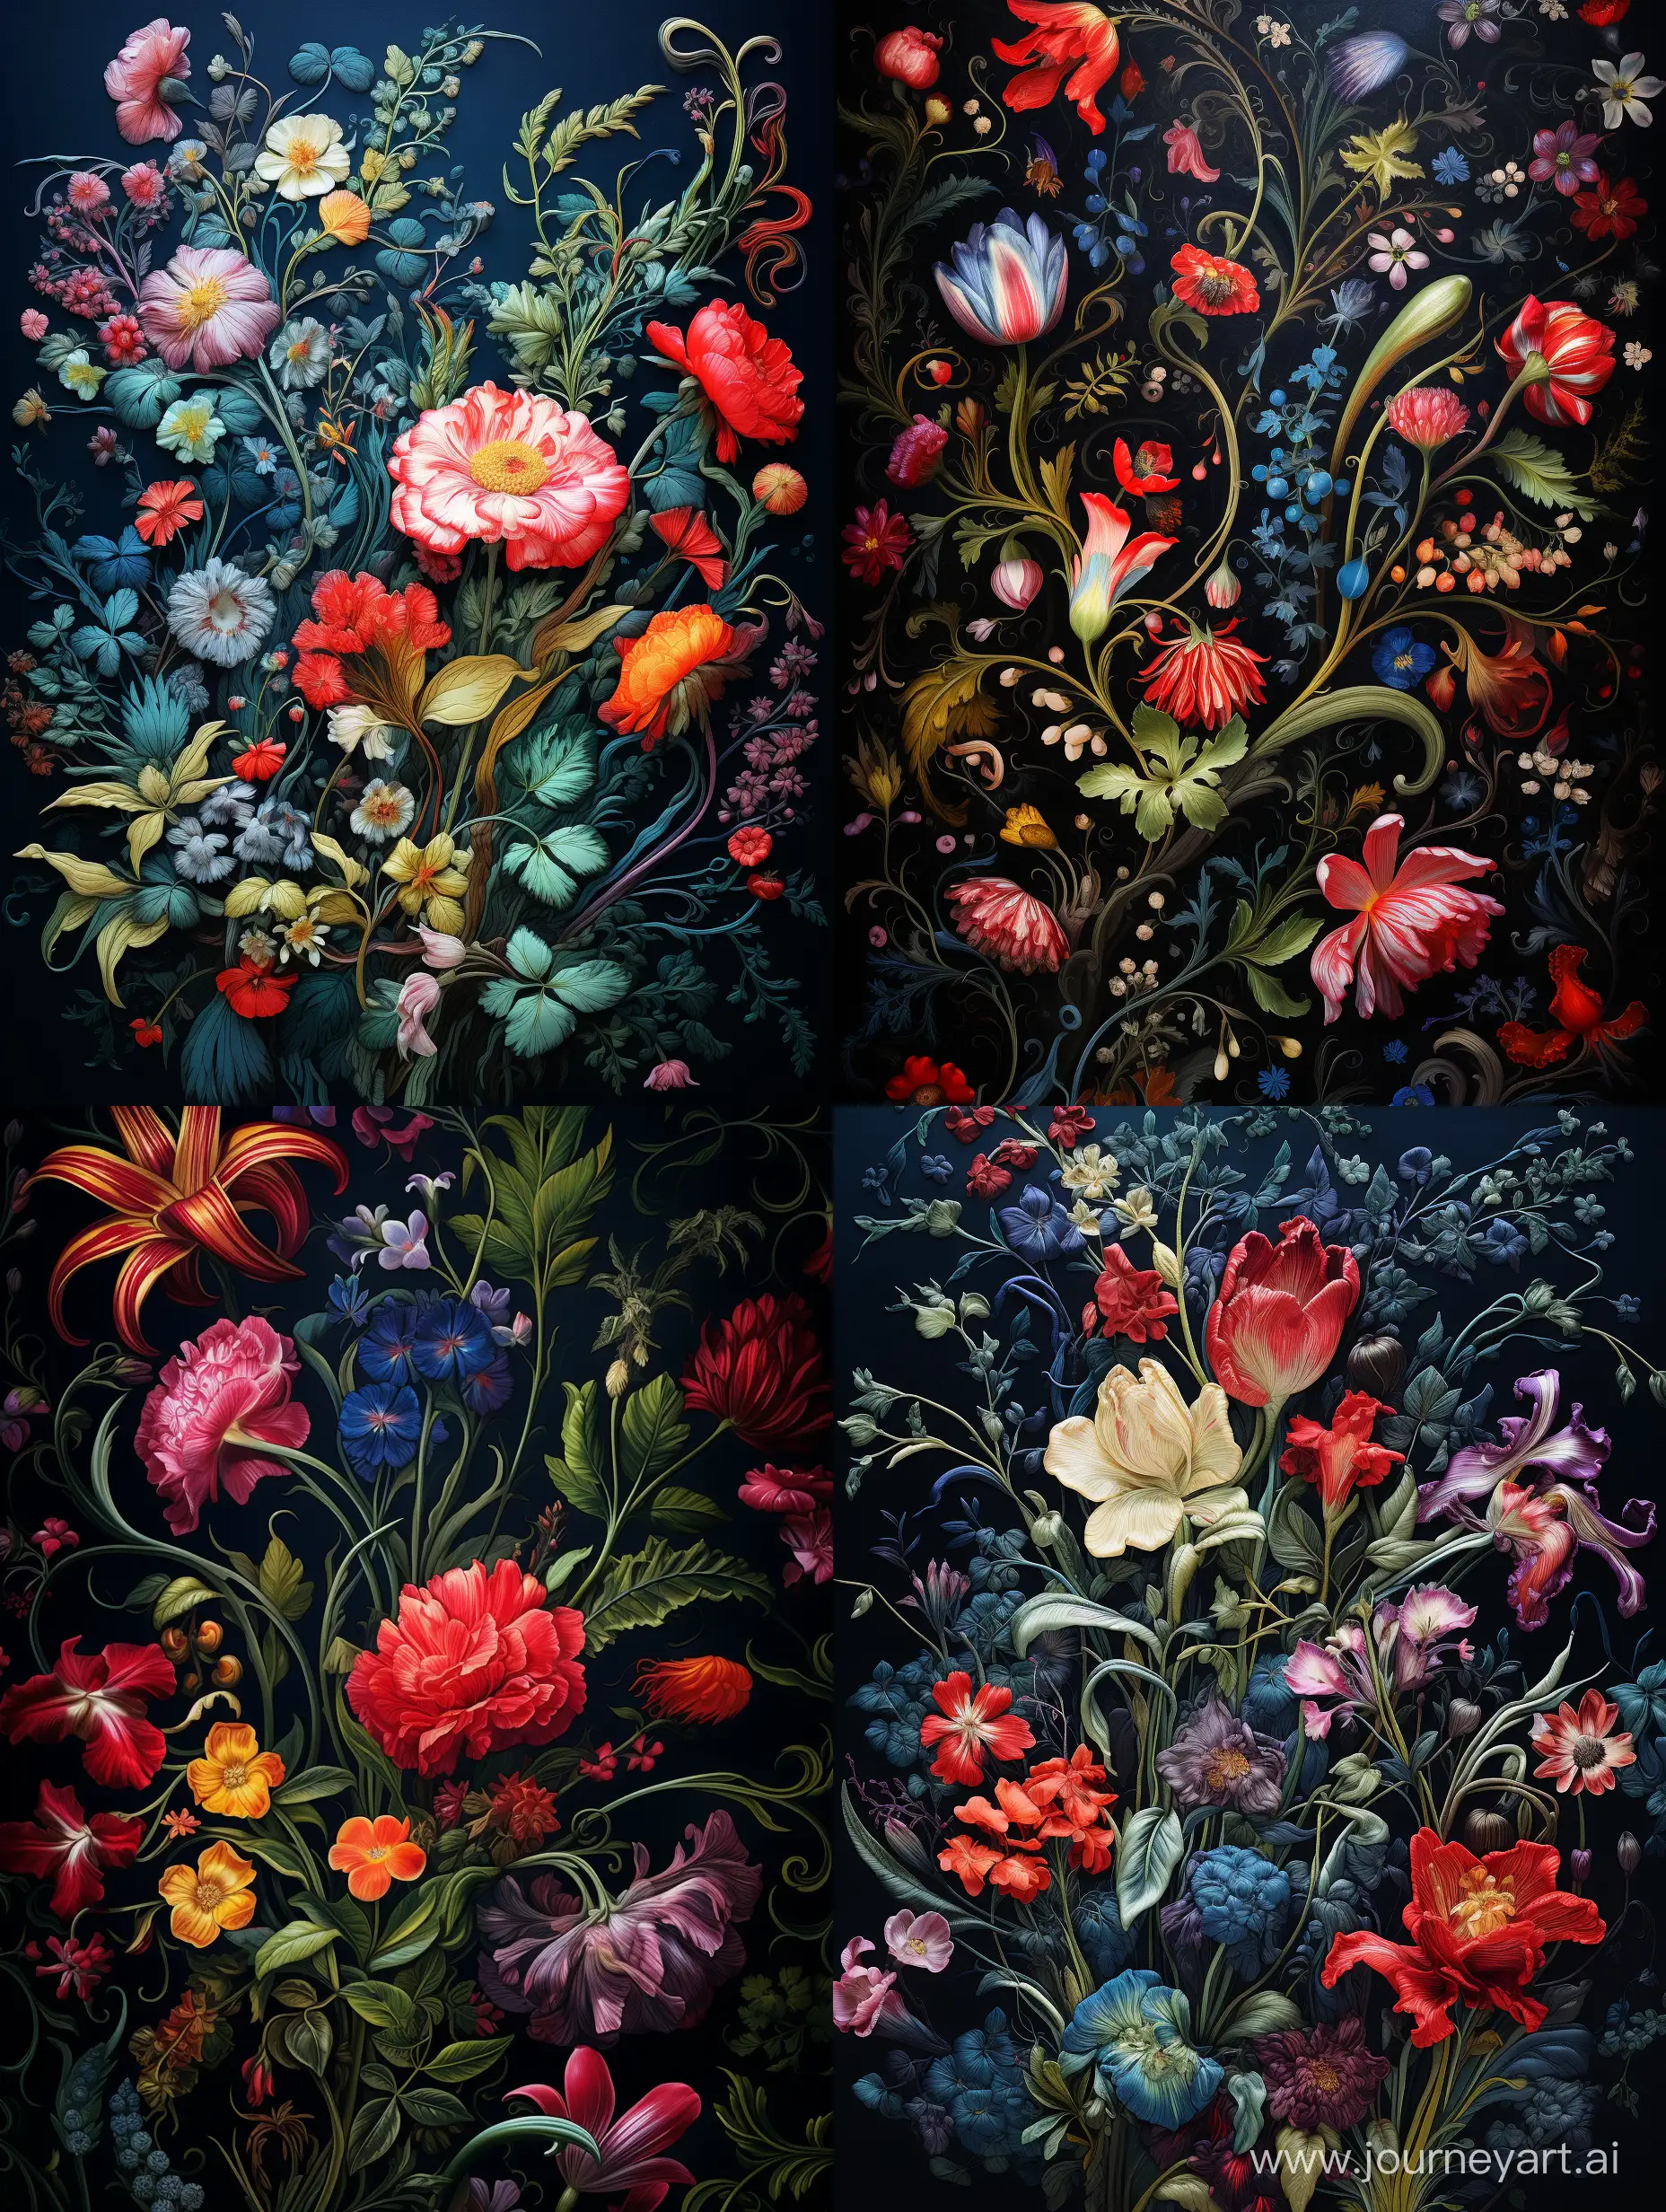 a painting of flowers floating in mid-air, in the style of baroque roccoco ornate and dramatic compositions, vibrant color schemes, embroidery, caravaggesque chiaroscuro, detailed botanicals, dark blue and red and green, ornate embroidery